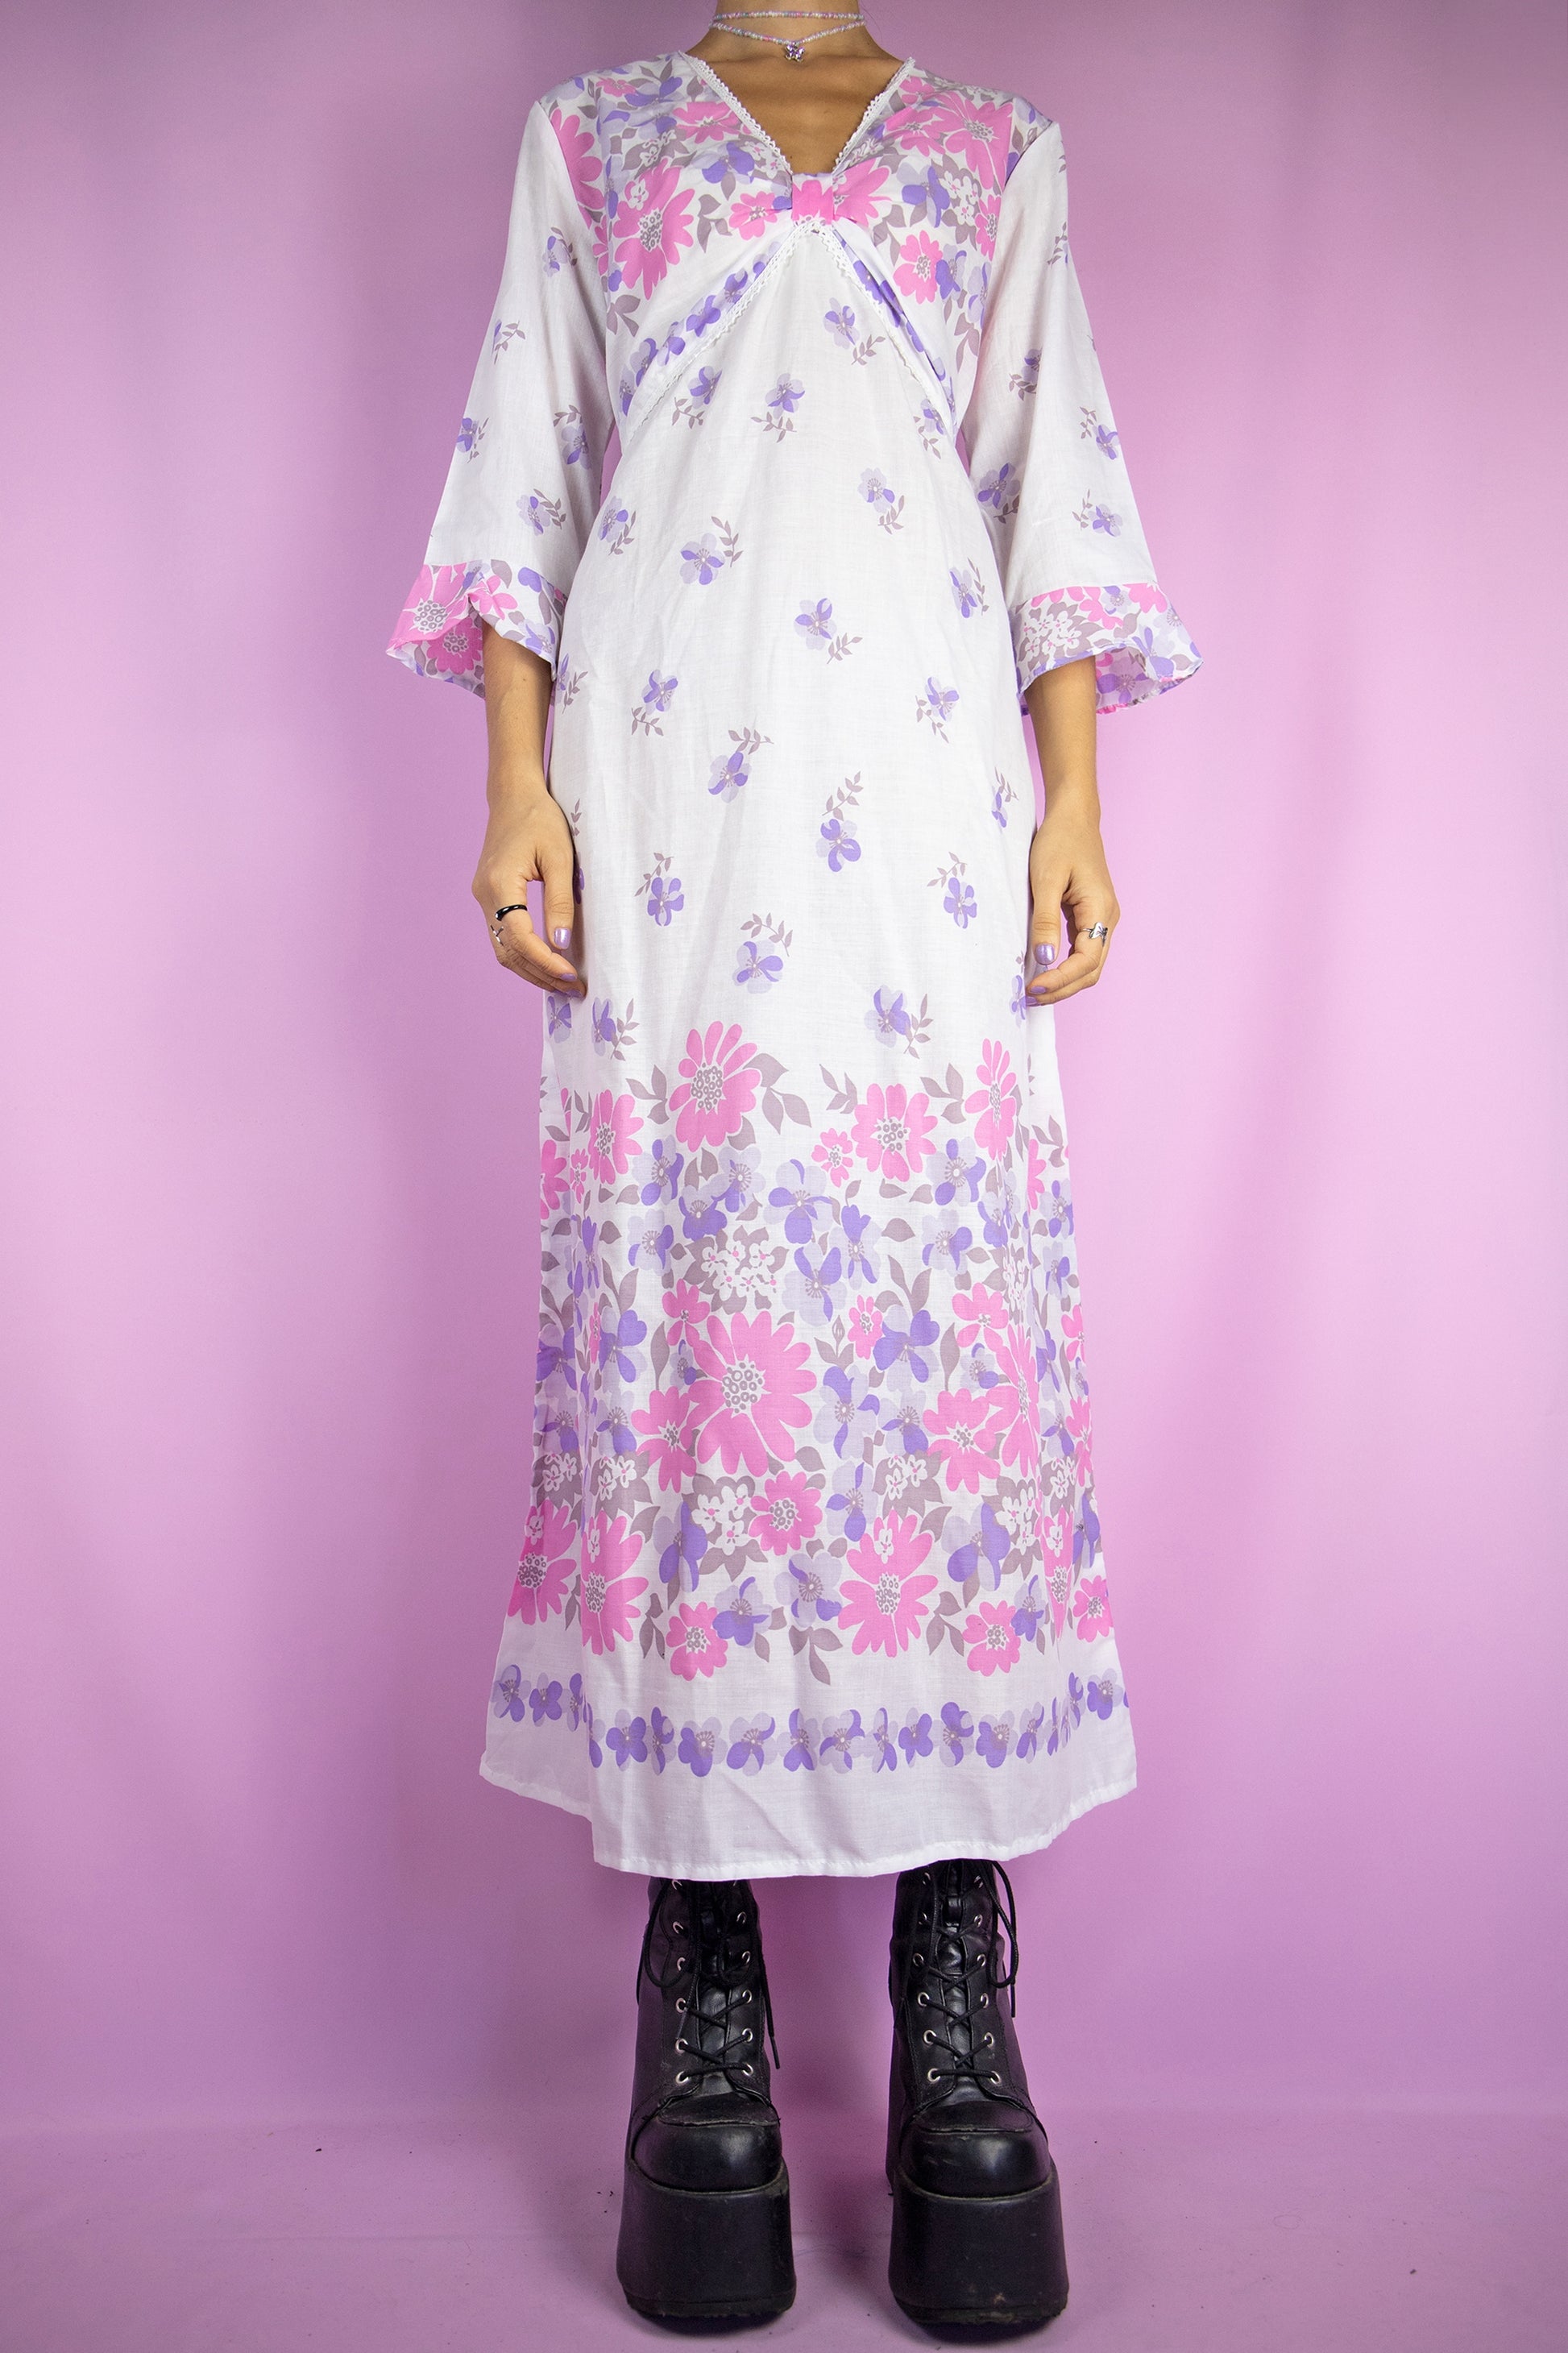 The Vintage 80s Boho White Midi Dress is a white pink and purple floral dress with a v-neck and bell sleeves. Lovely romantic cottage prairie inspired 1980s summer maxi dress.